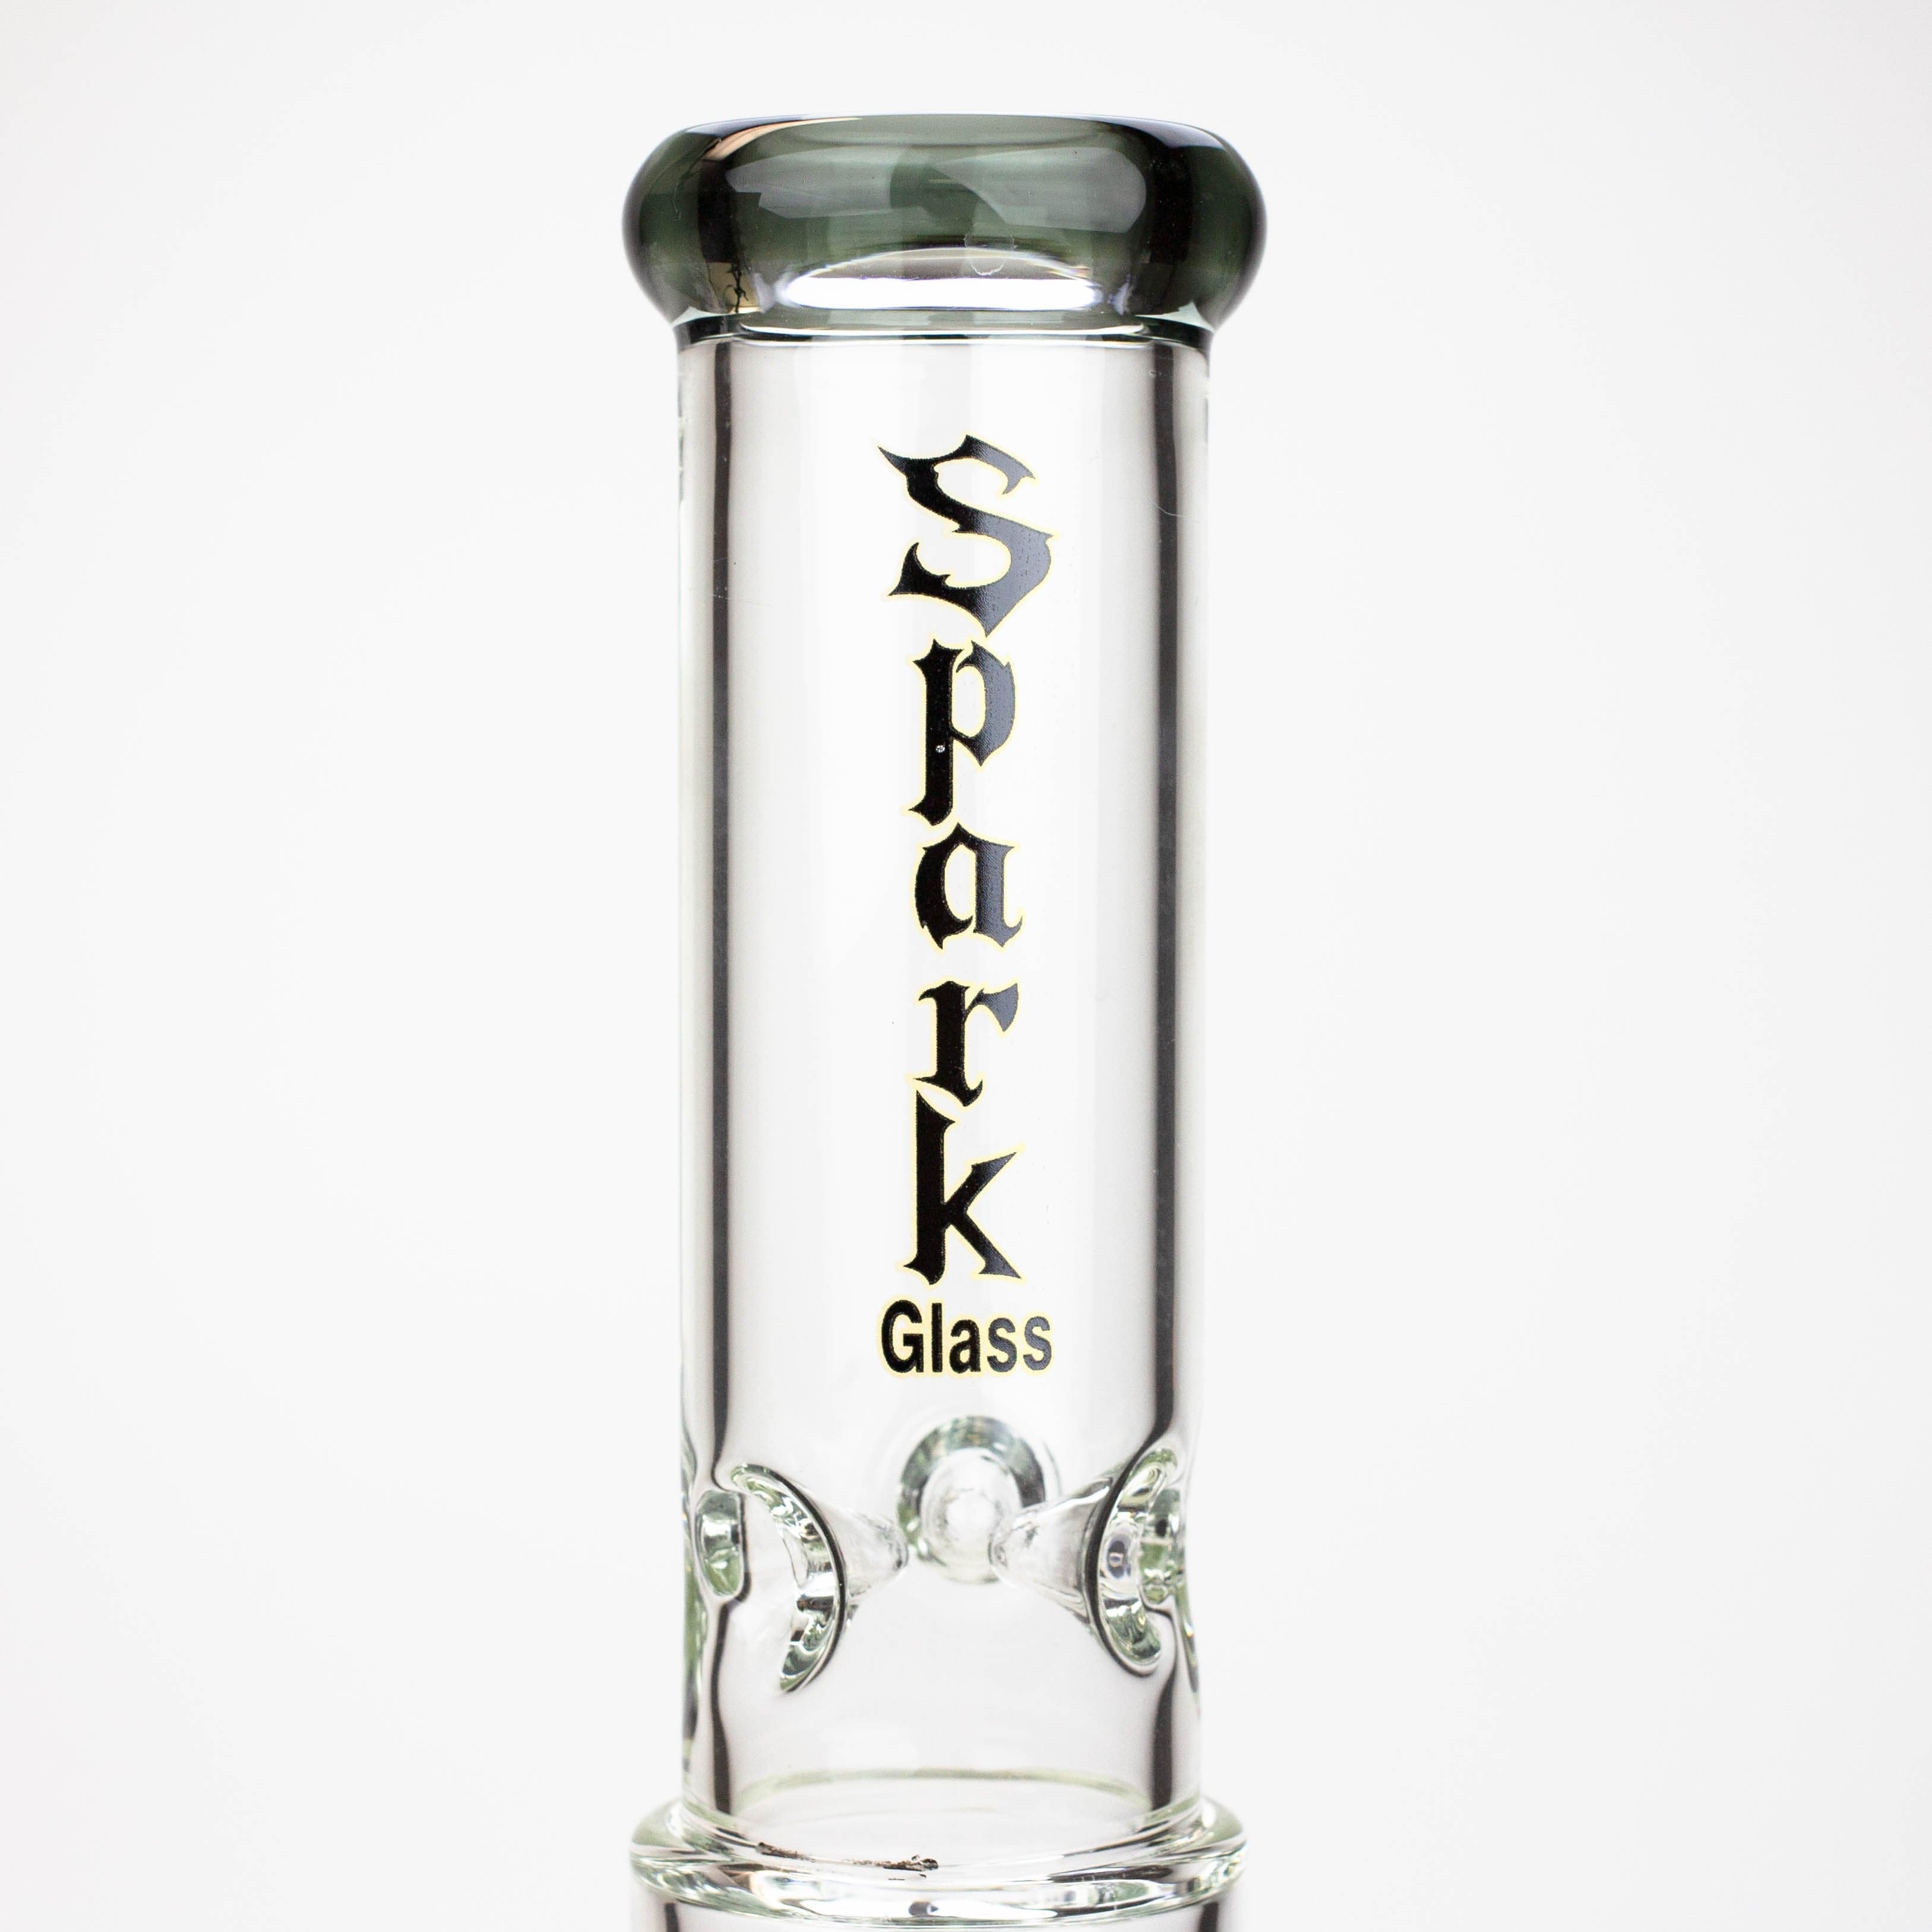 Spark 7 mm double percolator glass water pipes 19"_10